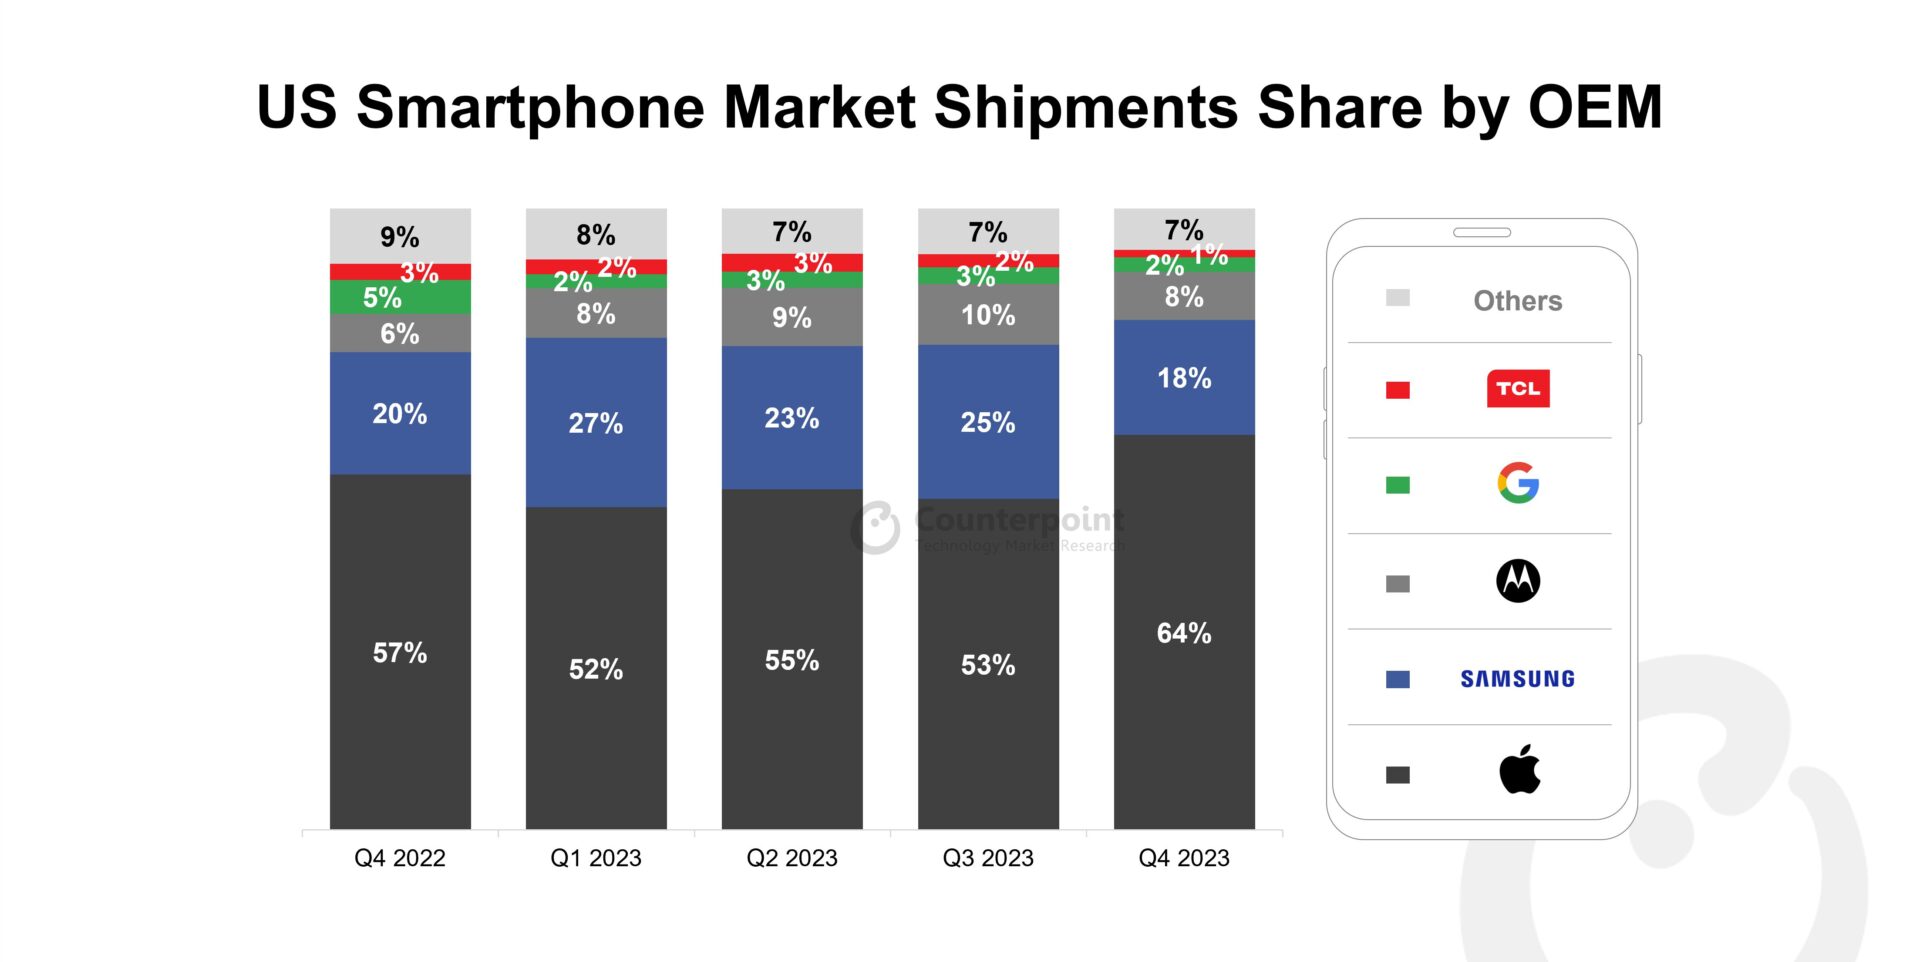 A chart showing US Smartphone Market Shipments Share by OEM